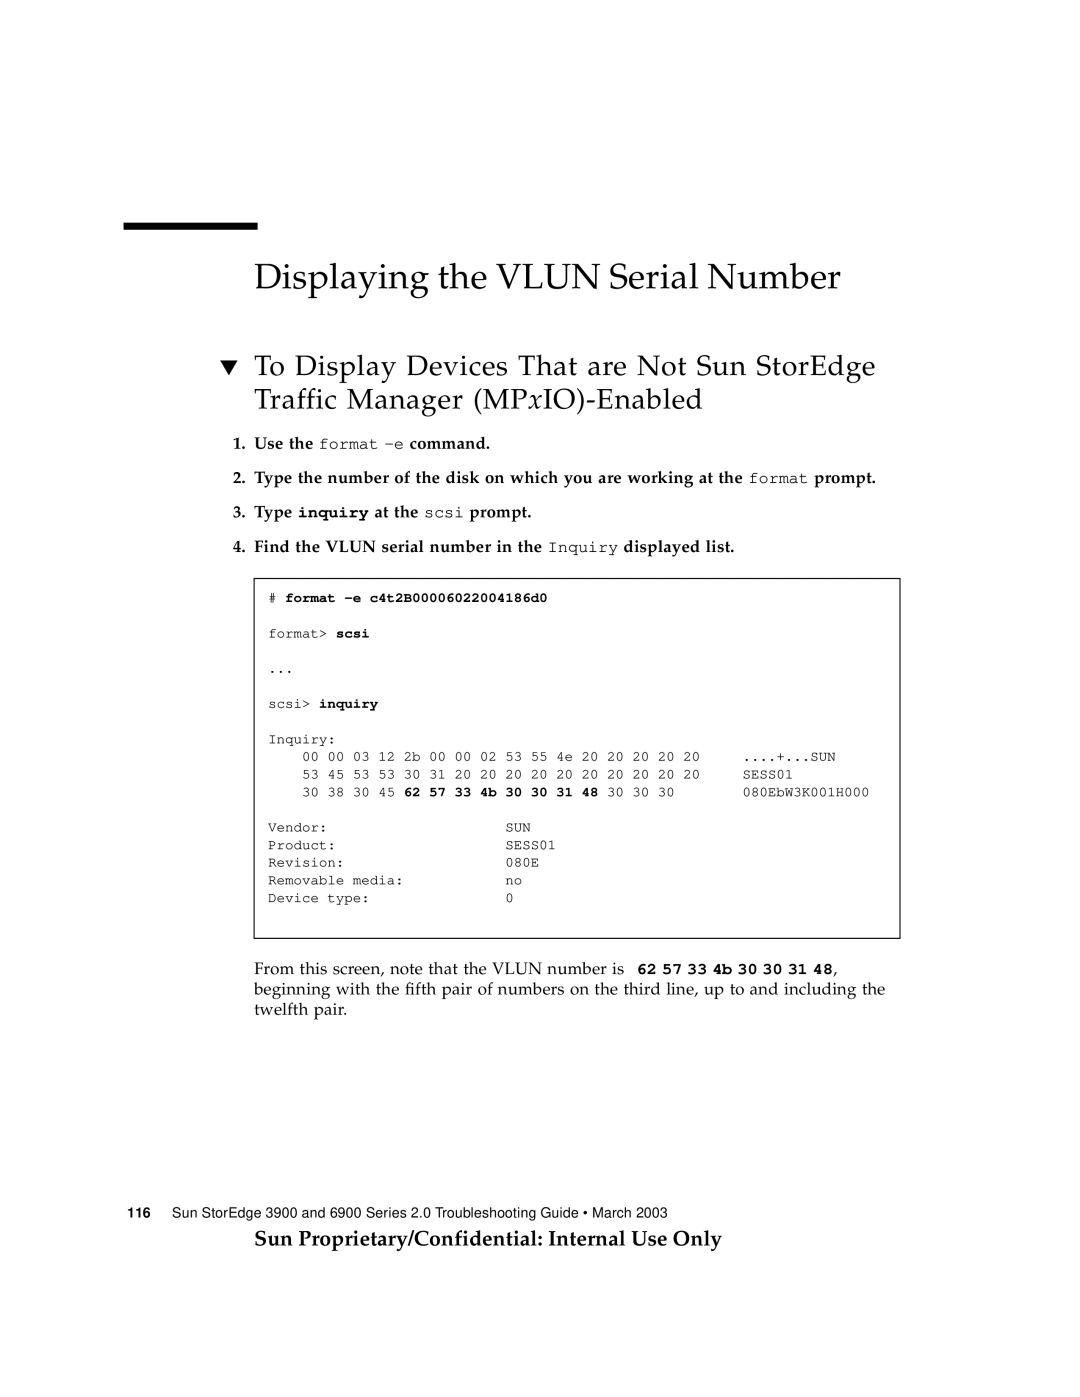 Sun Microsystems 3900, 6900 manual Displaying the VLUN Serial Number, Sun Proprietary/Confidential Internal Use Only 